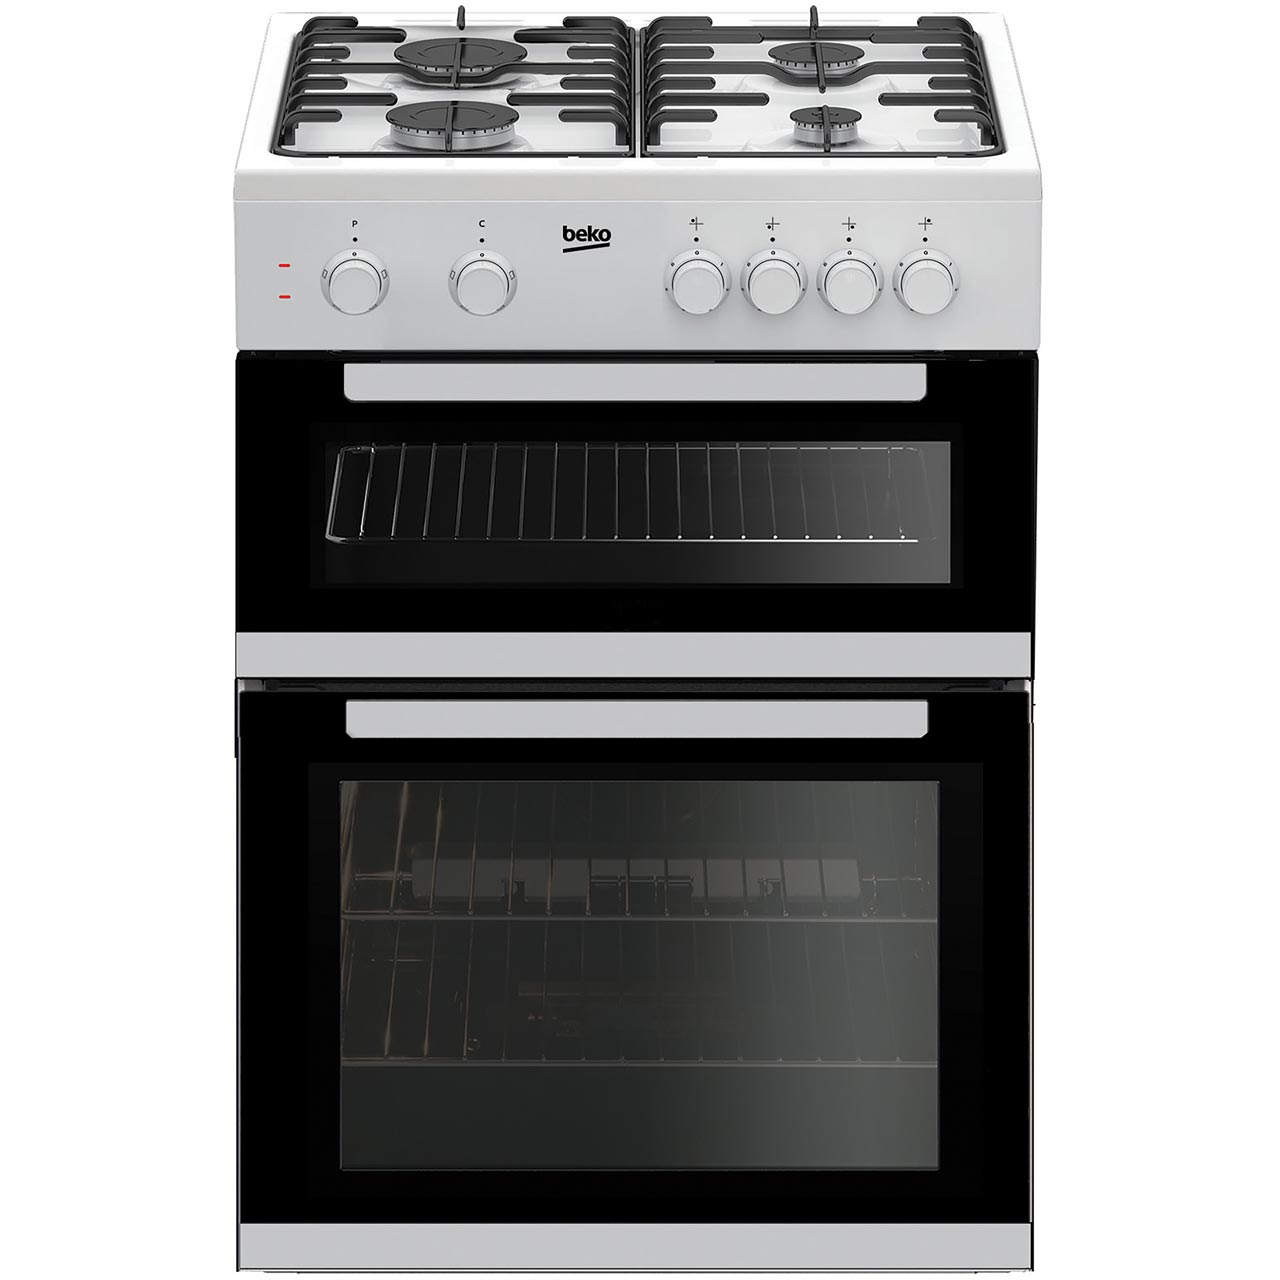 Beko KDG611W 60cm Freestanding Gas Cooker with Full Width Gas Grill - White - A+/A Rated, White